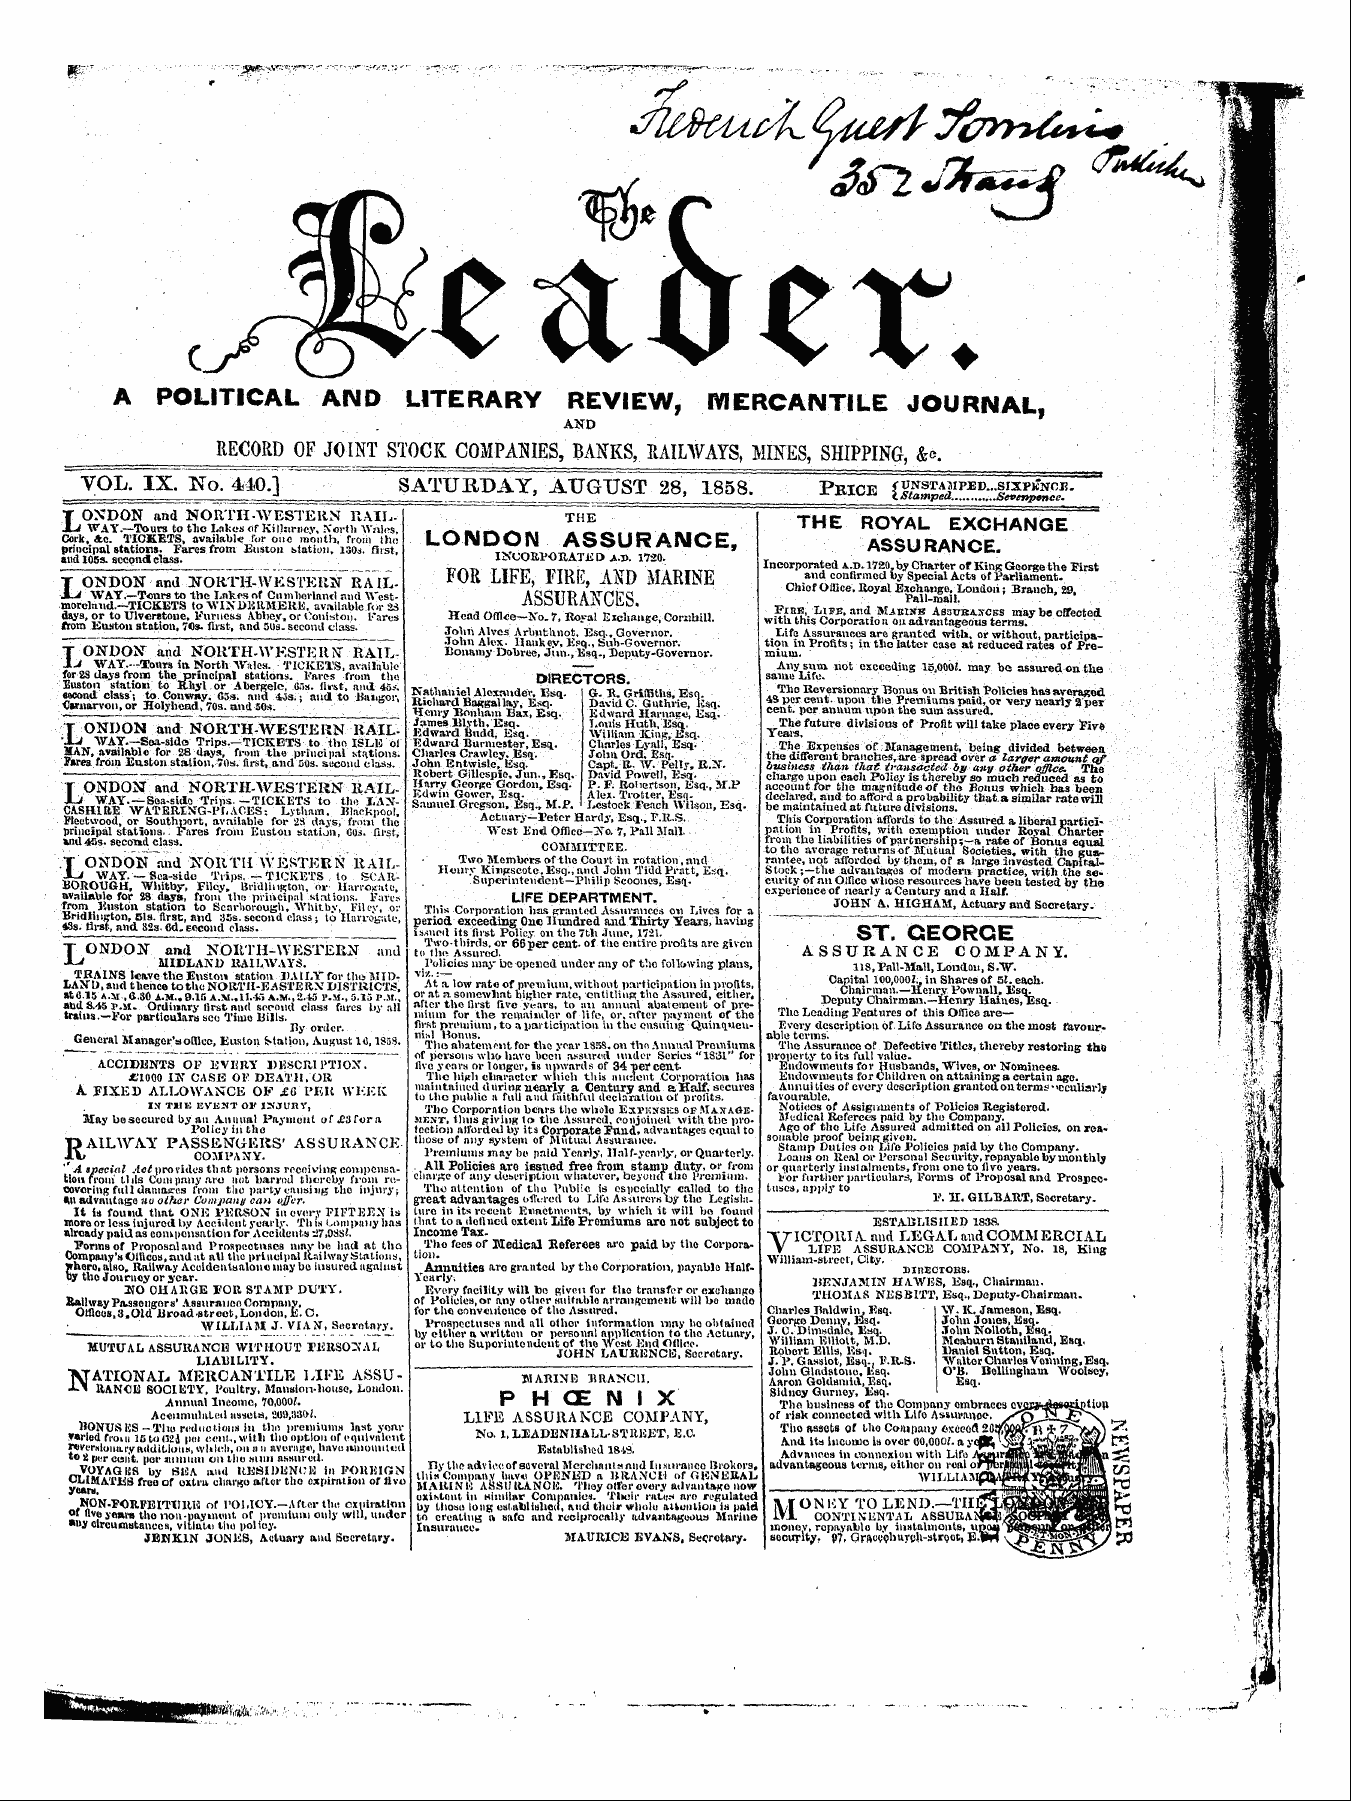 Leader (1850-1860): jS F Y, 1st edition - Ad00104